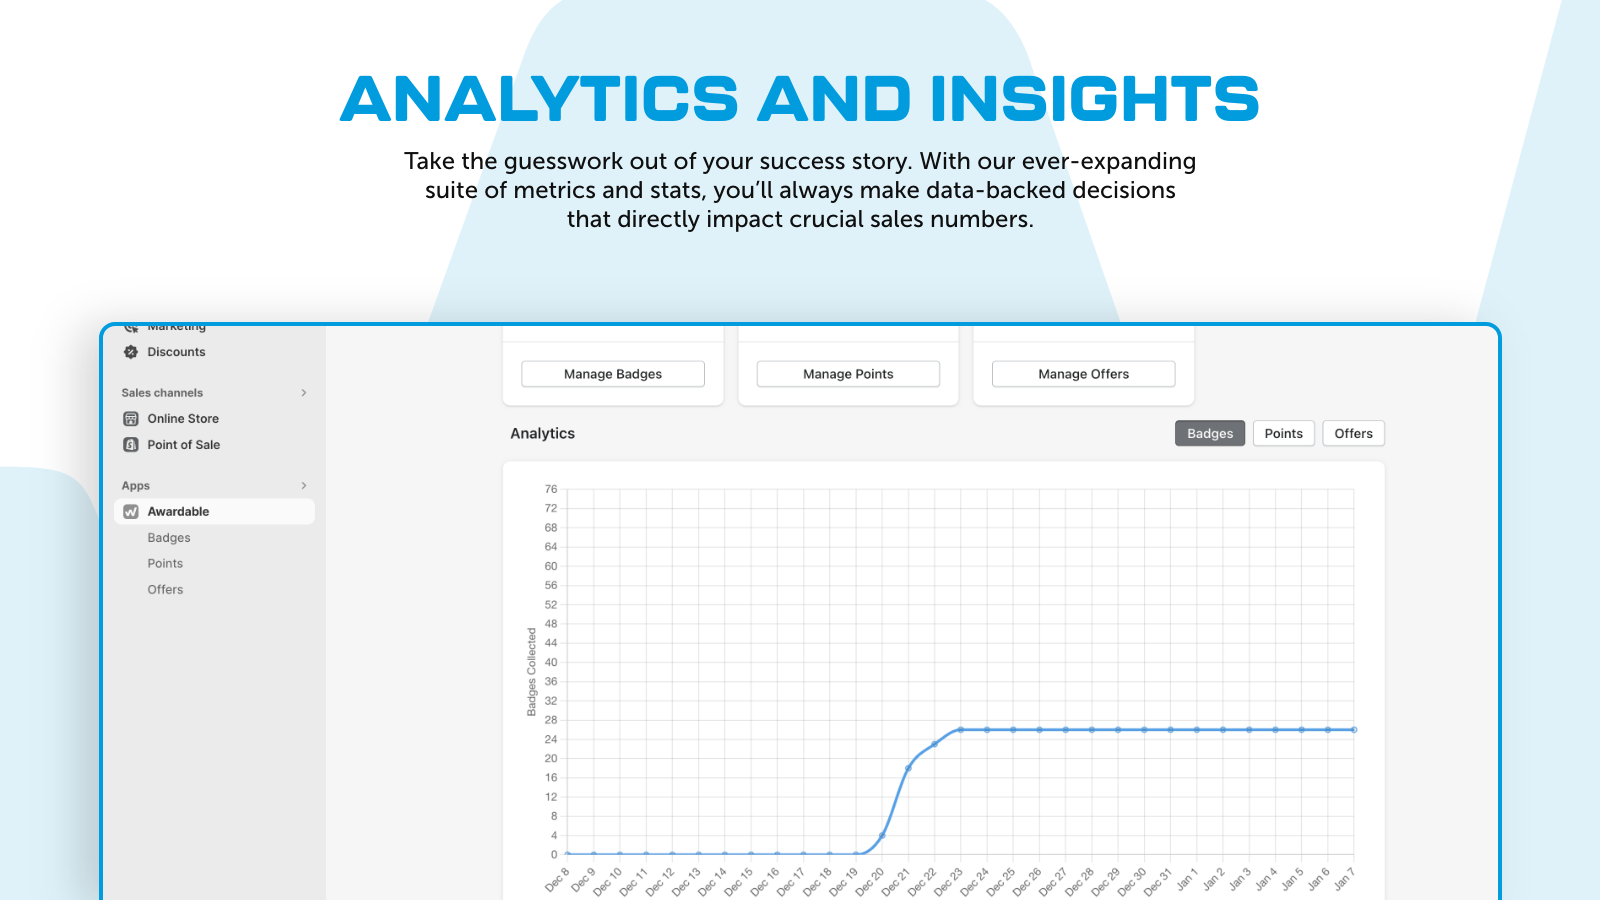 Make data-backed decisions using our suite of metrics.